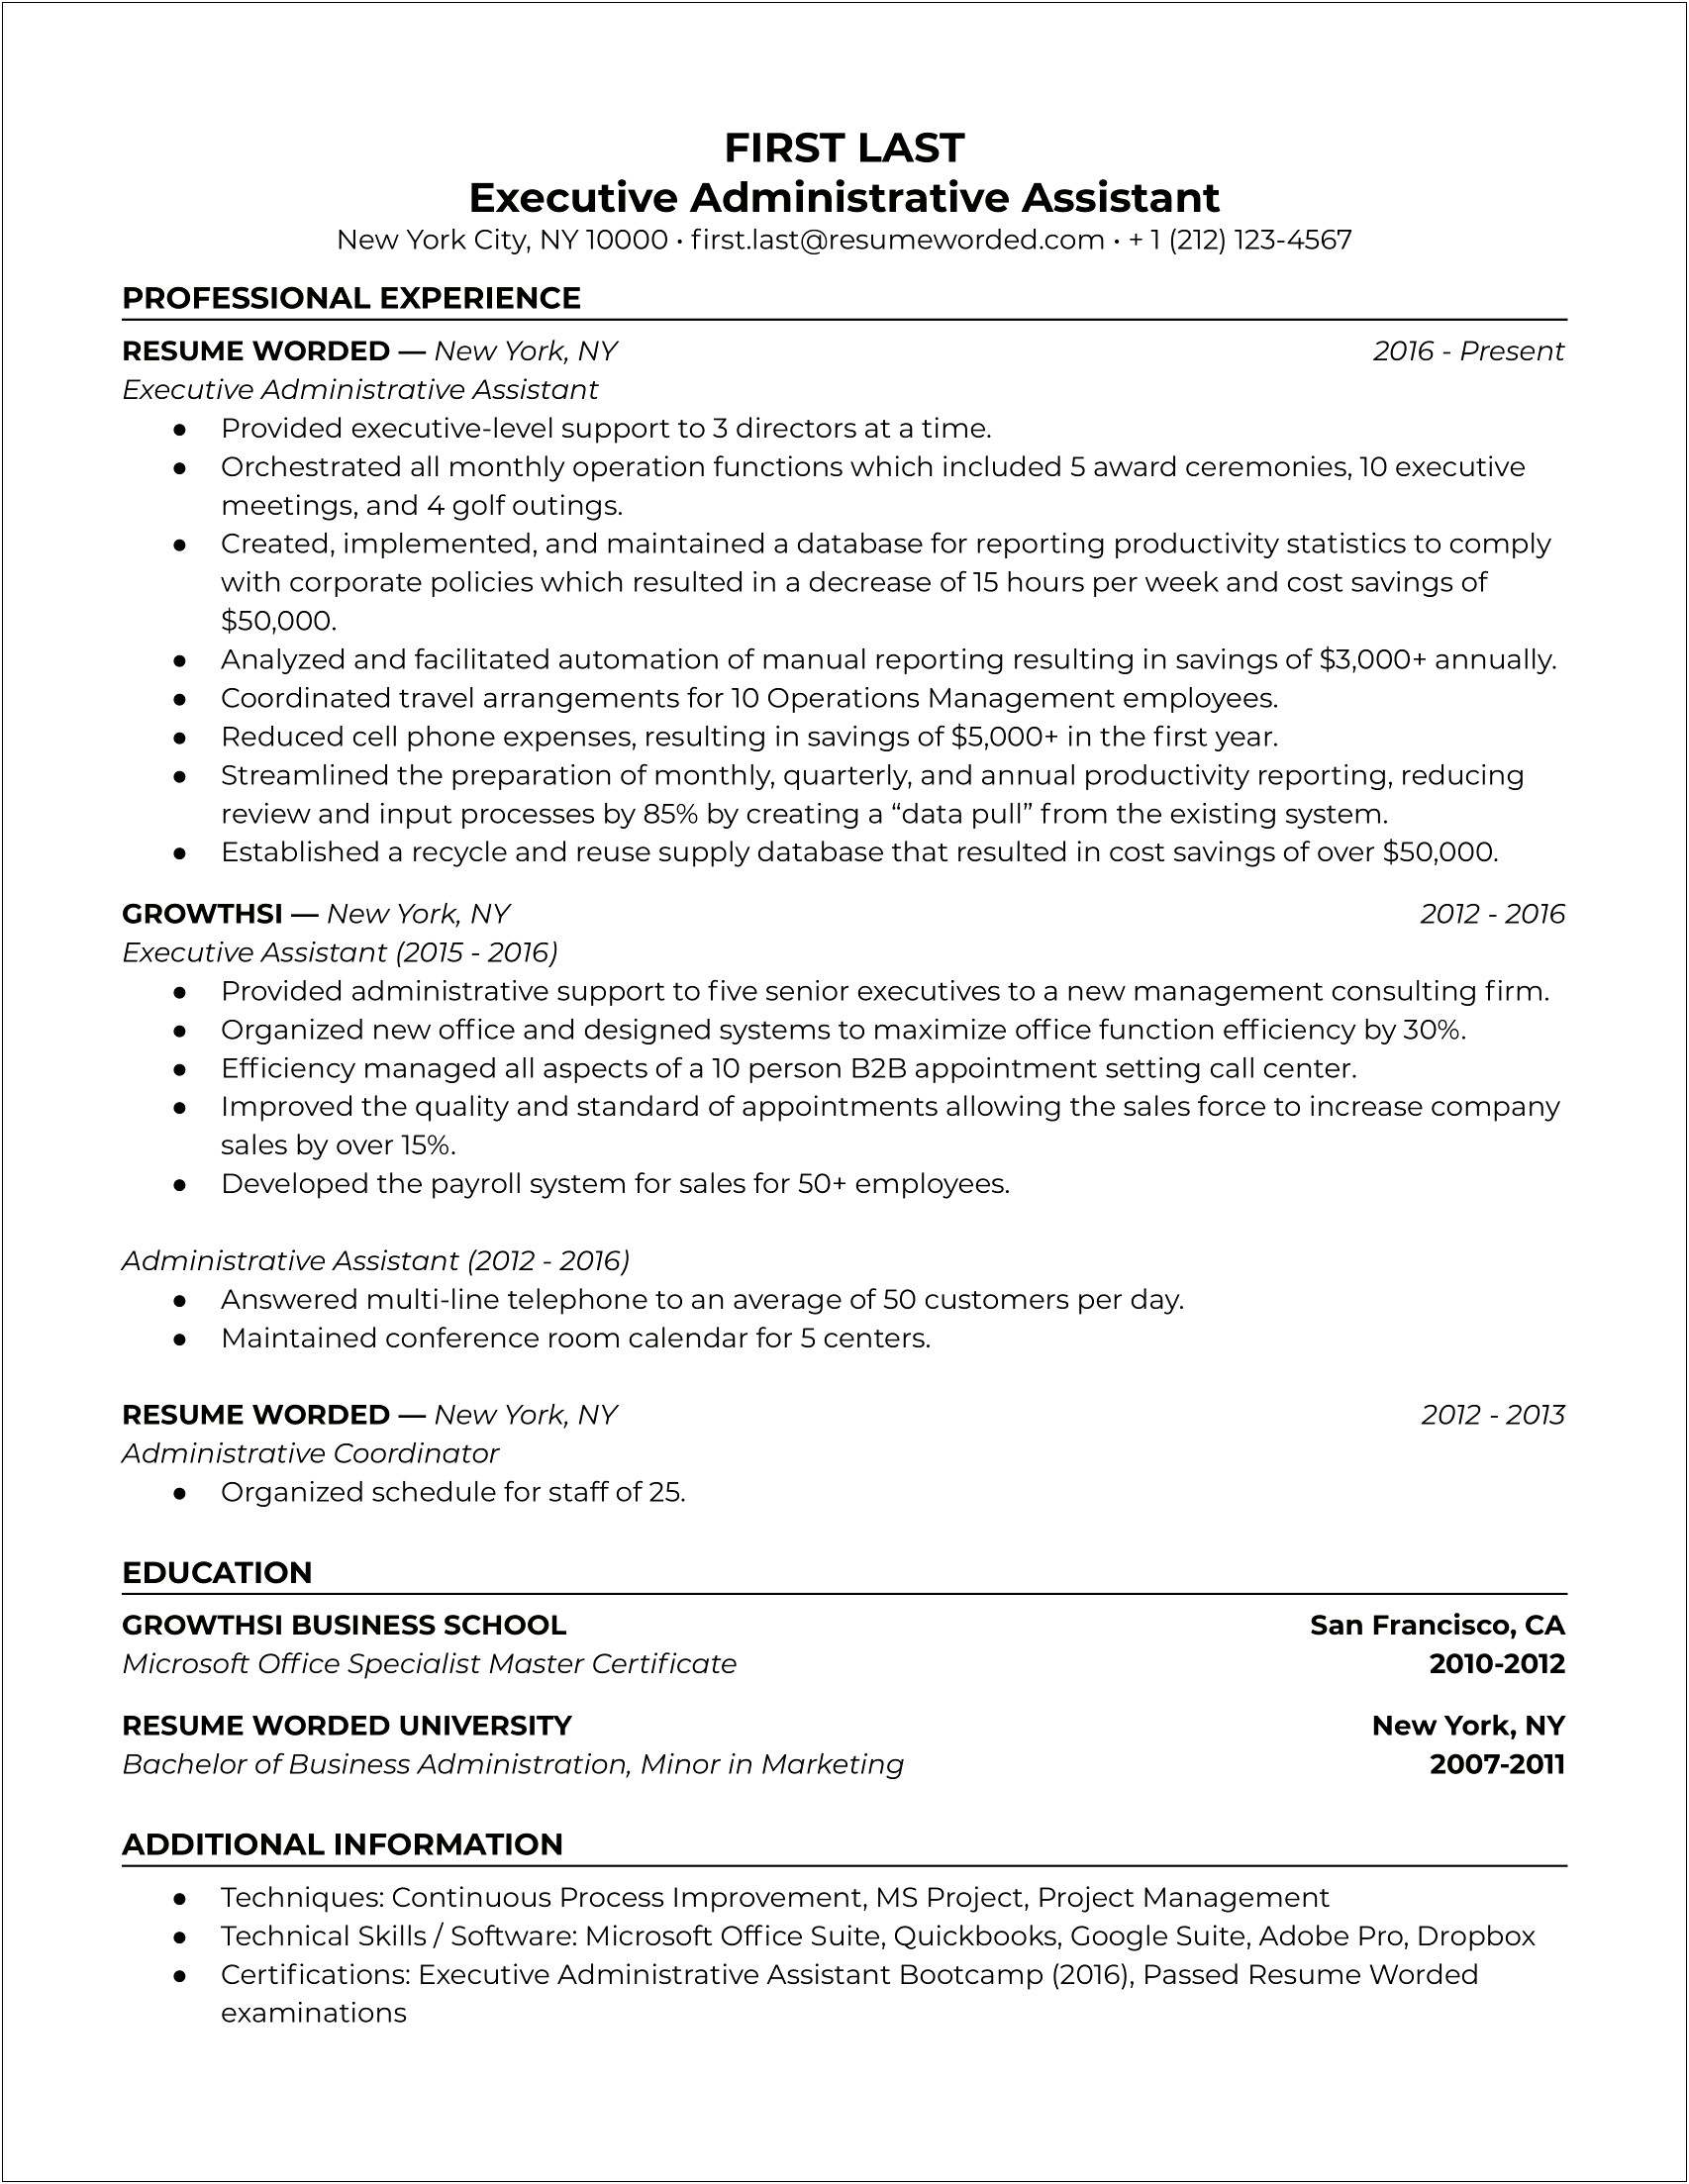 Functional Resume Administrative Assistant Key Skills